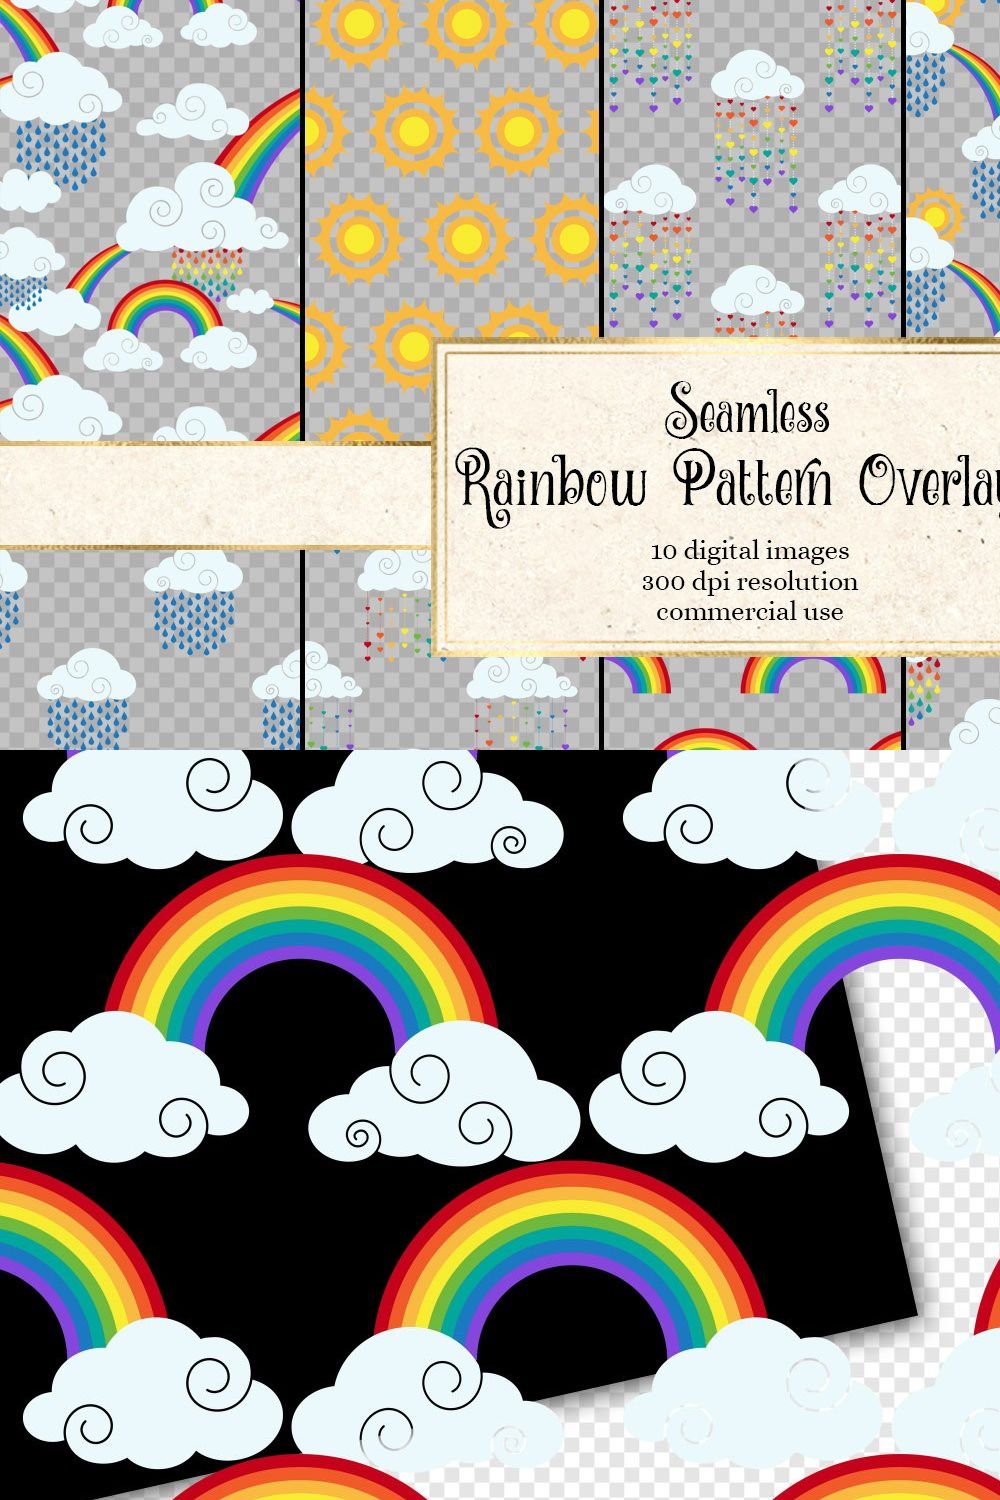 Rainbow Pattern Overlays pinterest preview image.